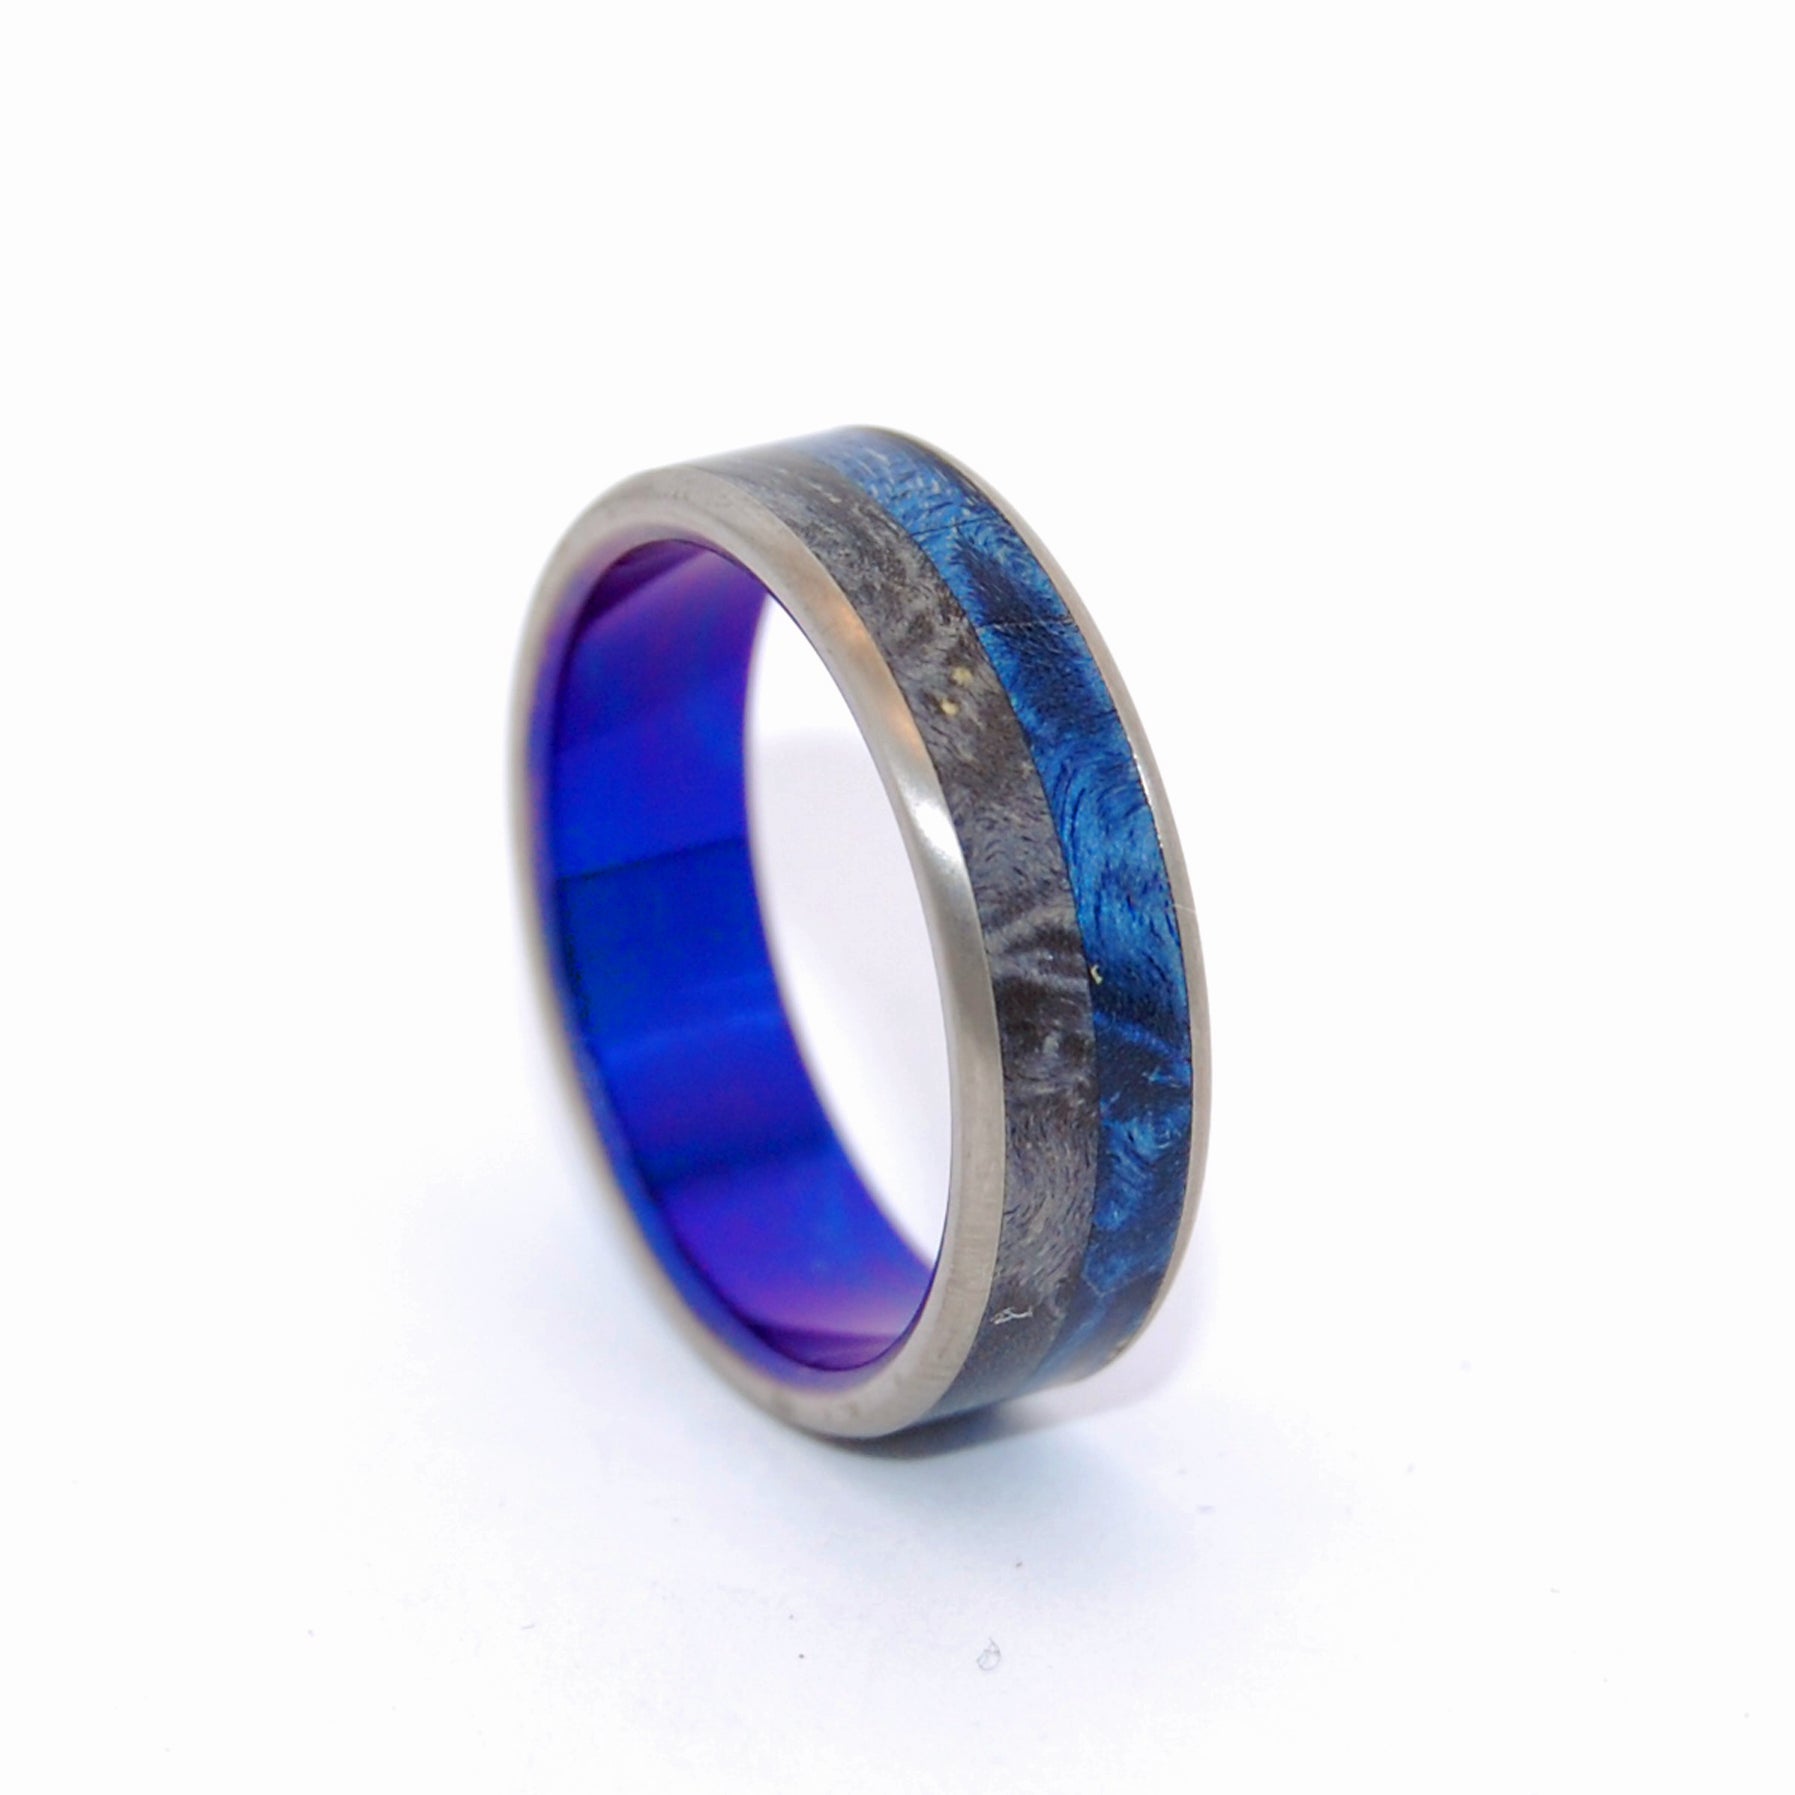 Take Me | Wood and Hand Anodized Blue - Titanium Wedding Ring - Minter and Richter Designs